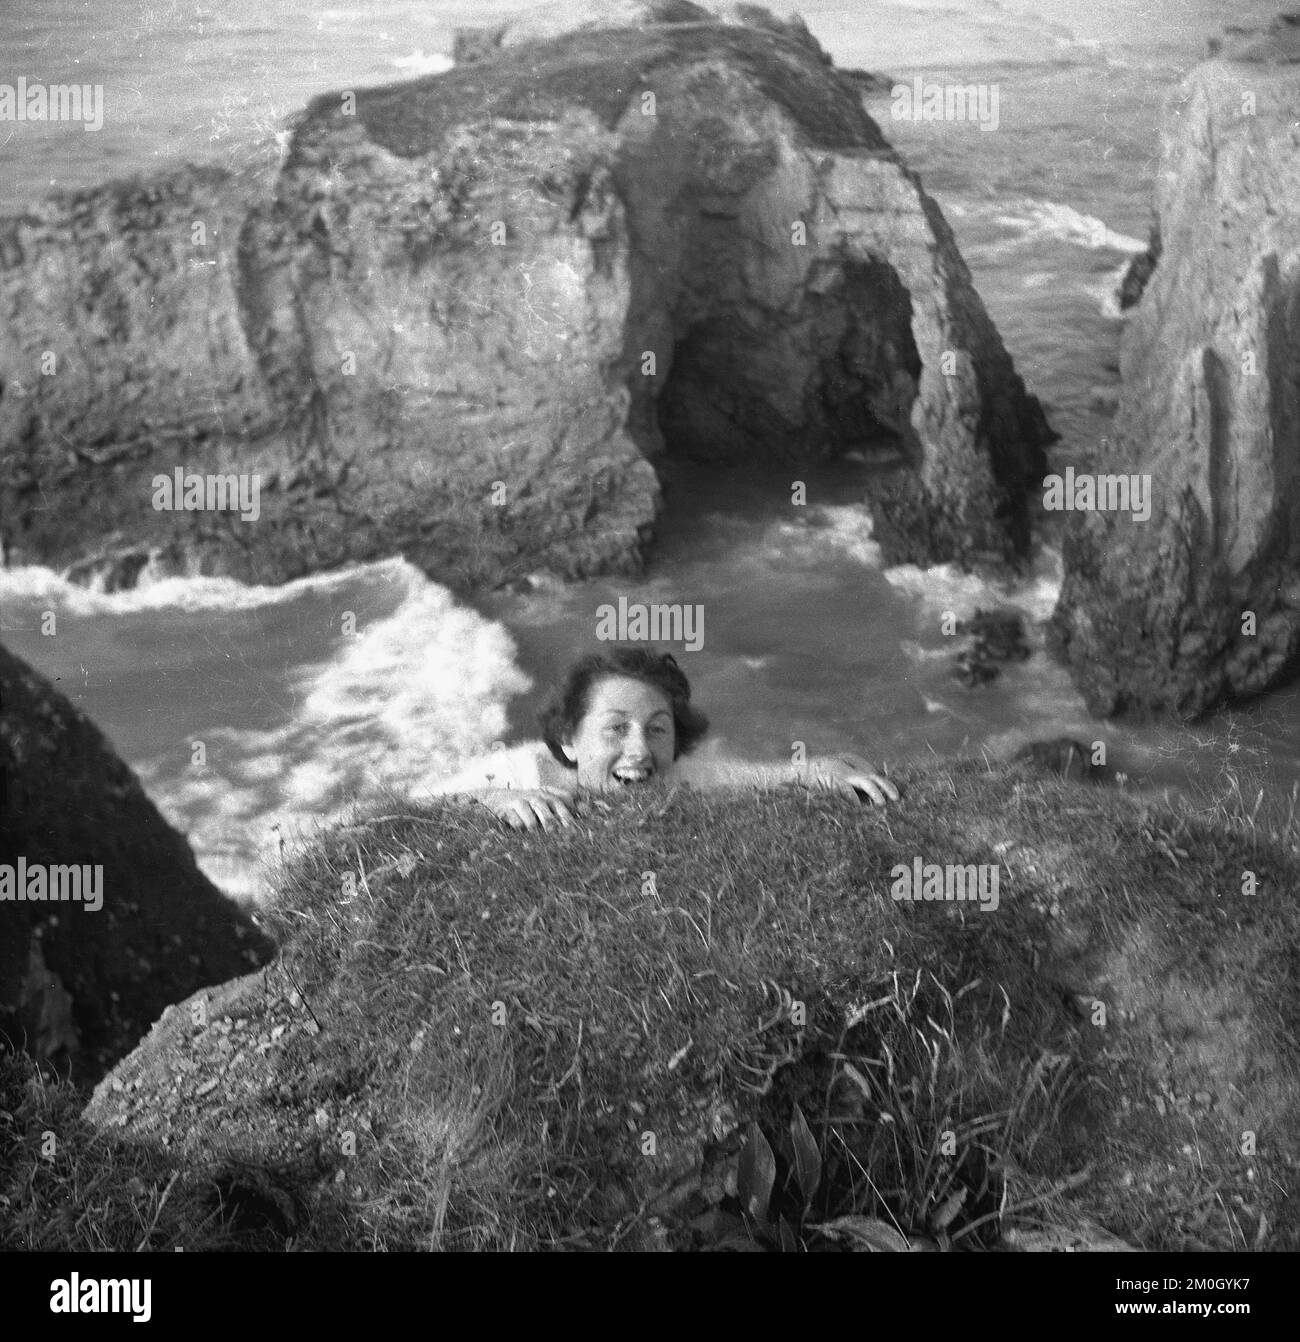 1950s, historical, at the coast, high above the ocean, looking down at the sea and protruding rocks, a lady below the ground, pretending perhaps that she is clinging on to the cliff face or overhang, England, UK. Stock Photo